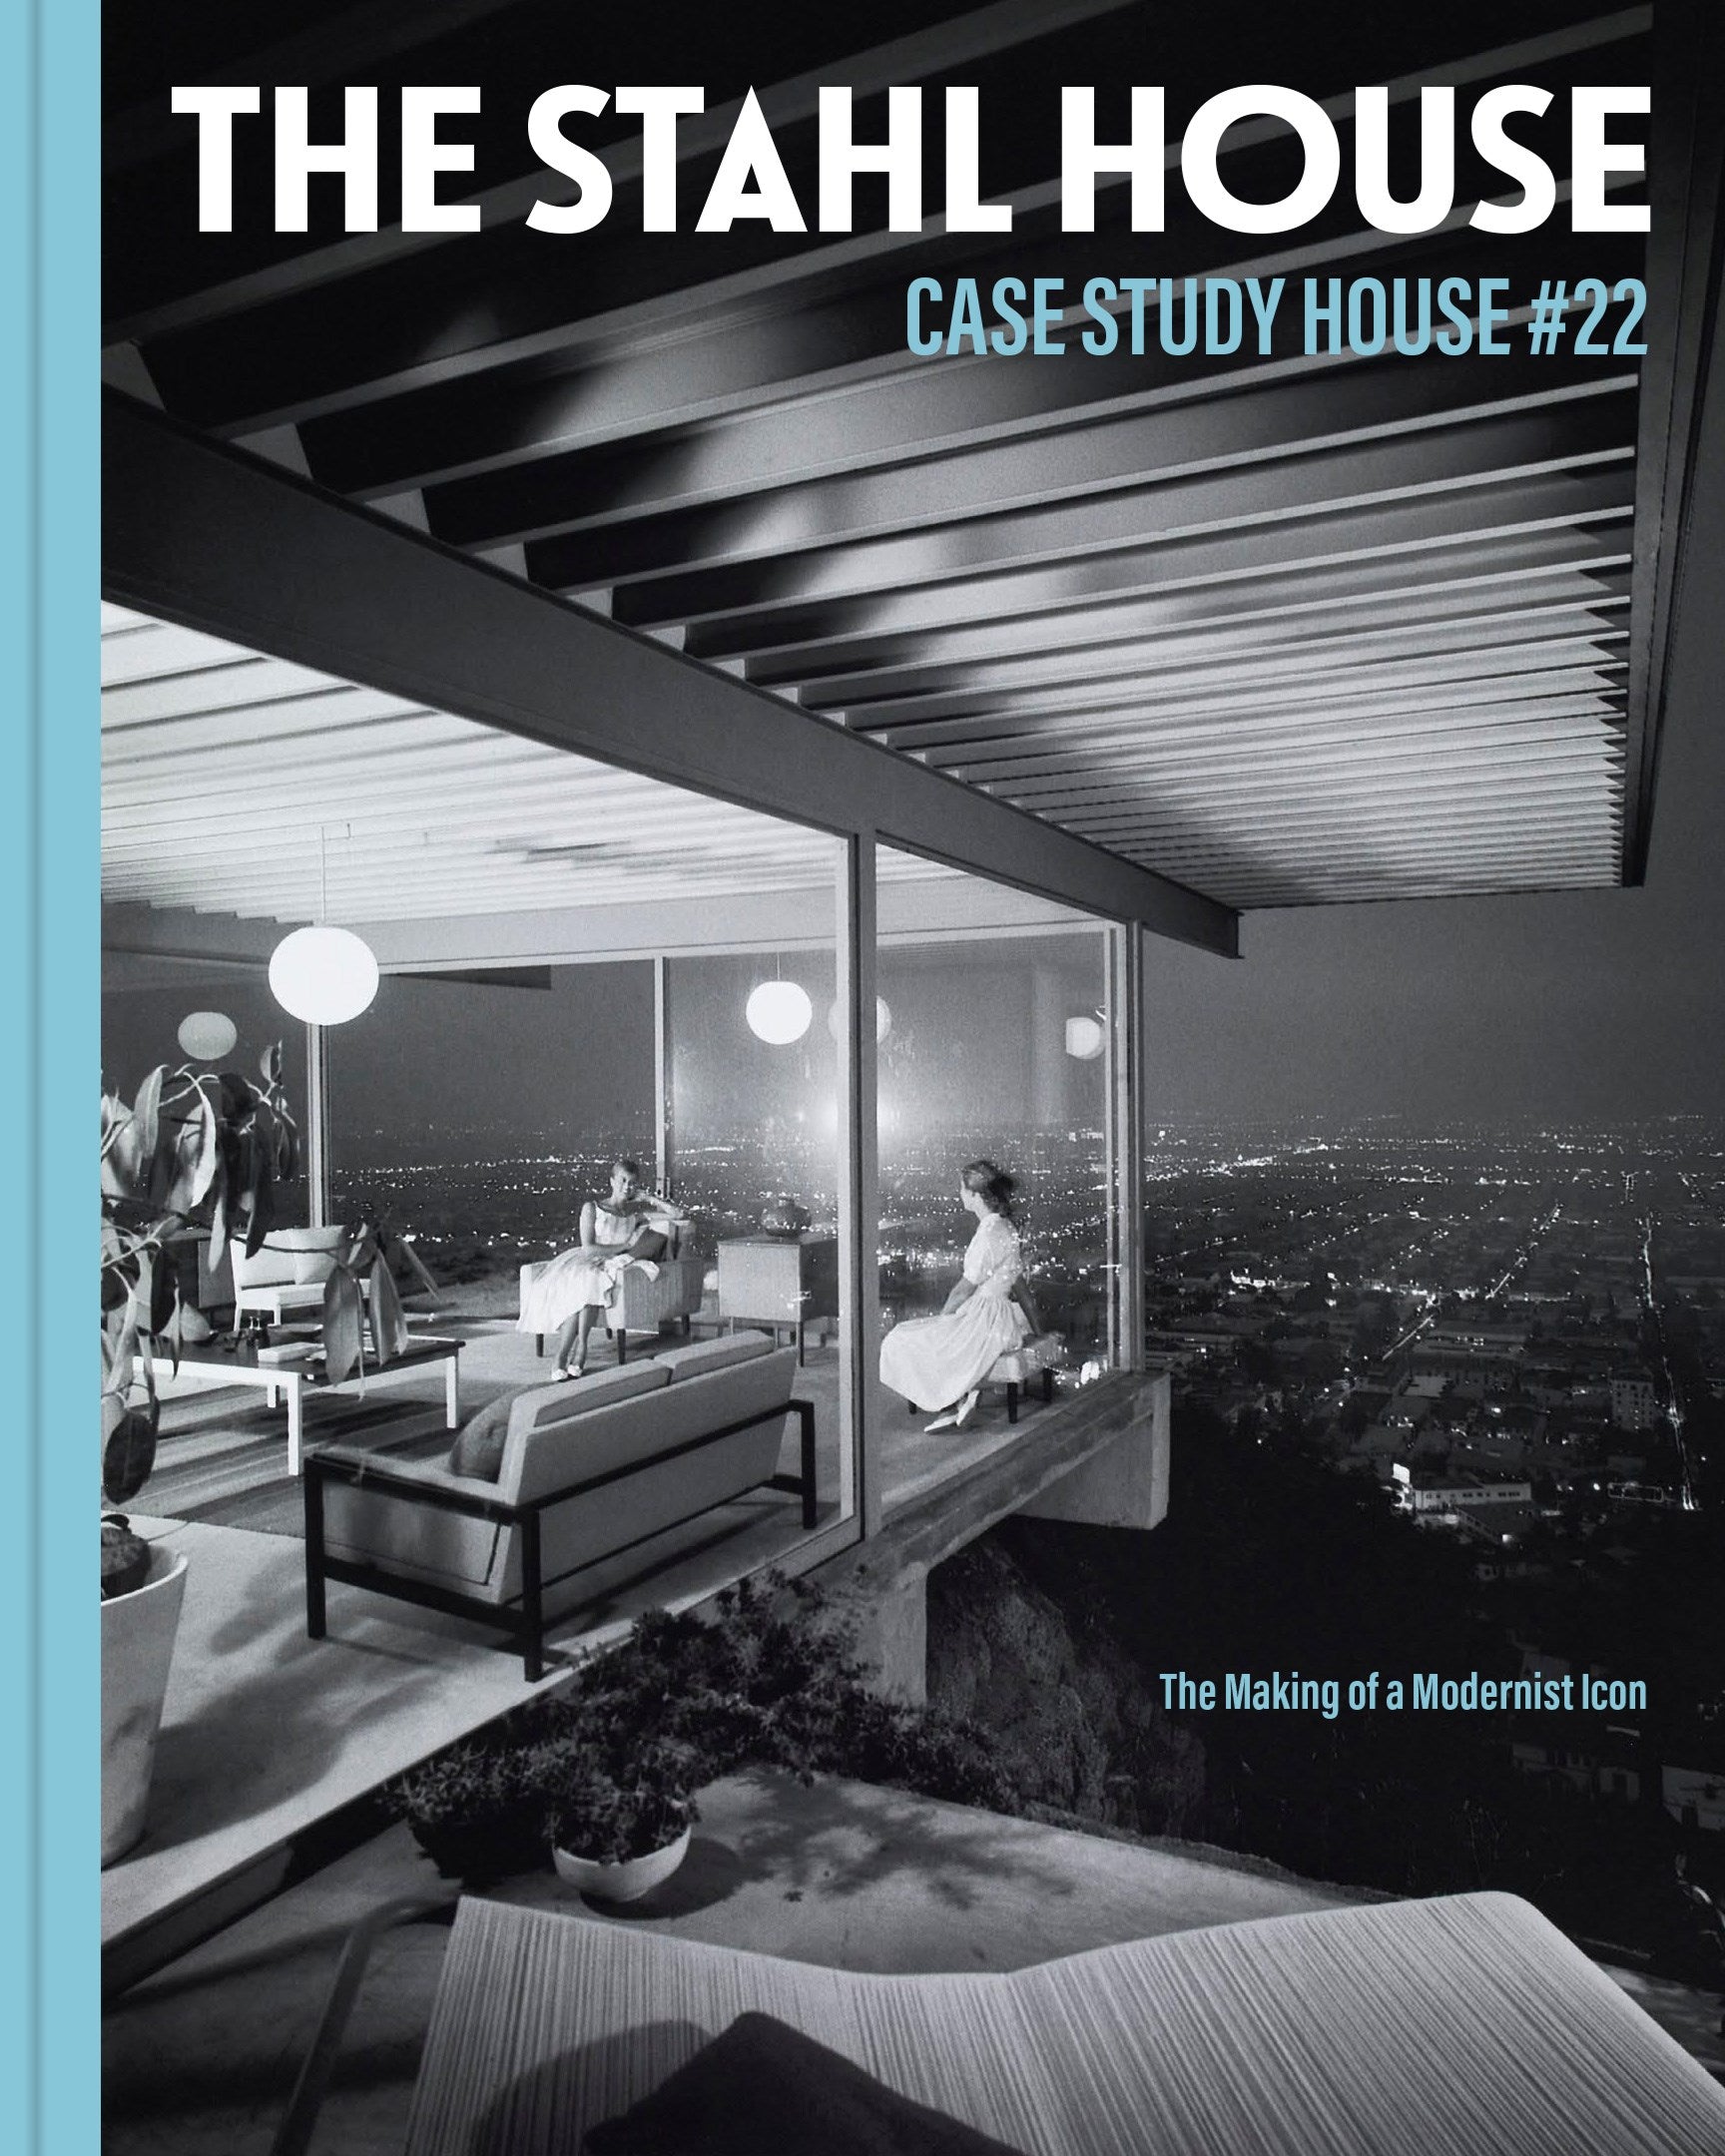 The Stahl House: Case Study House #22 : The Making of a Modernist Icon